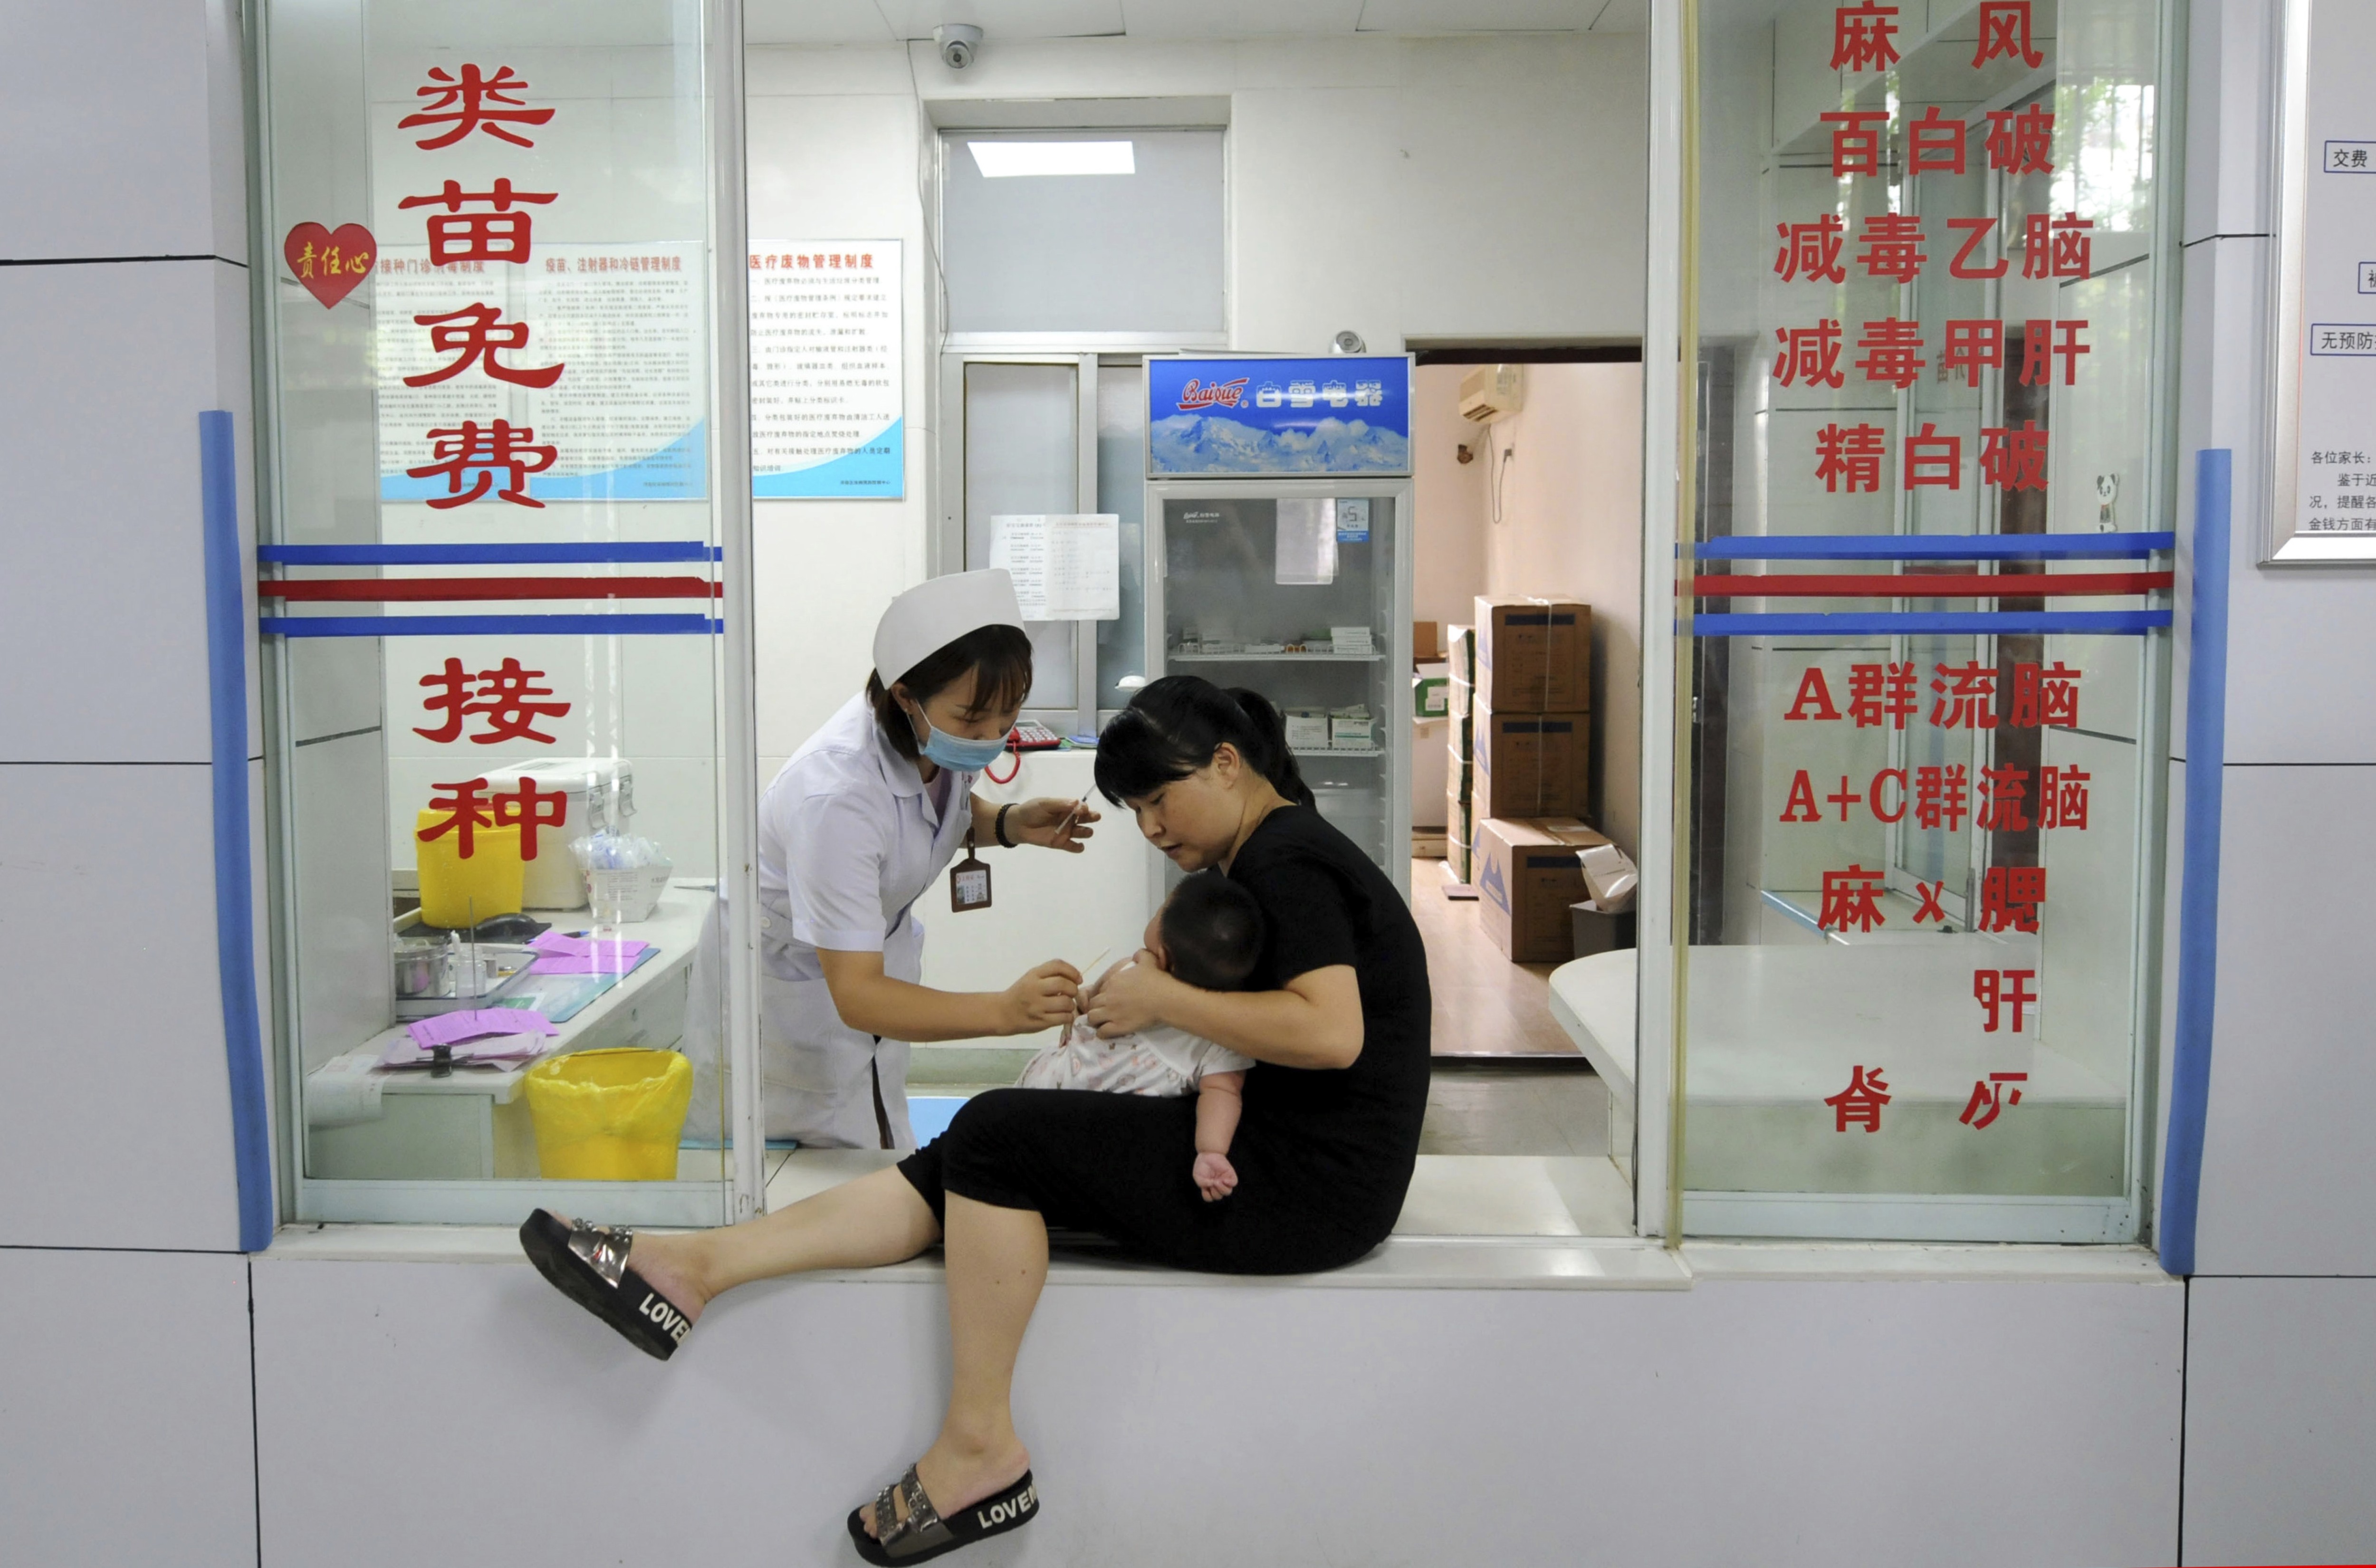 A woman holds an infant as a nurse administers a vaccination in eastern China. Authorities ordered a recall of Changchun Changsheng Life Sciences products after it was found falsifying records. Photo: Chinatopix via AP